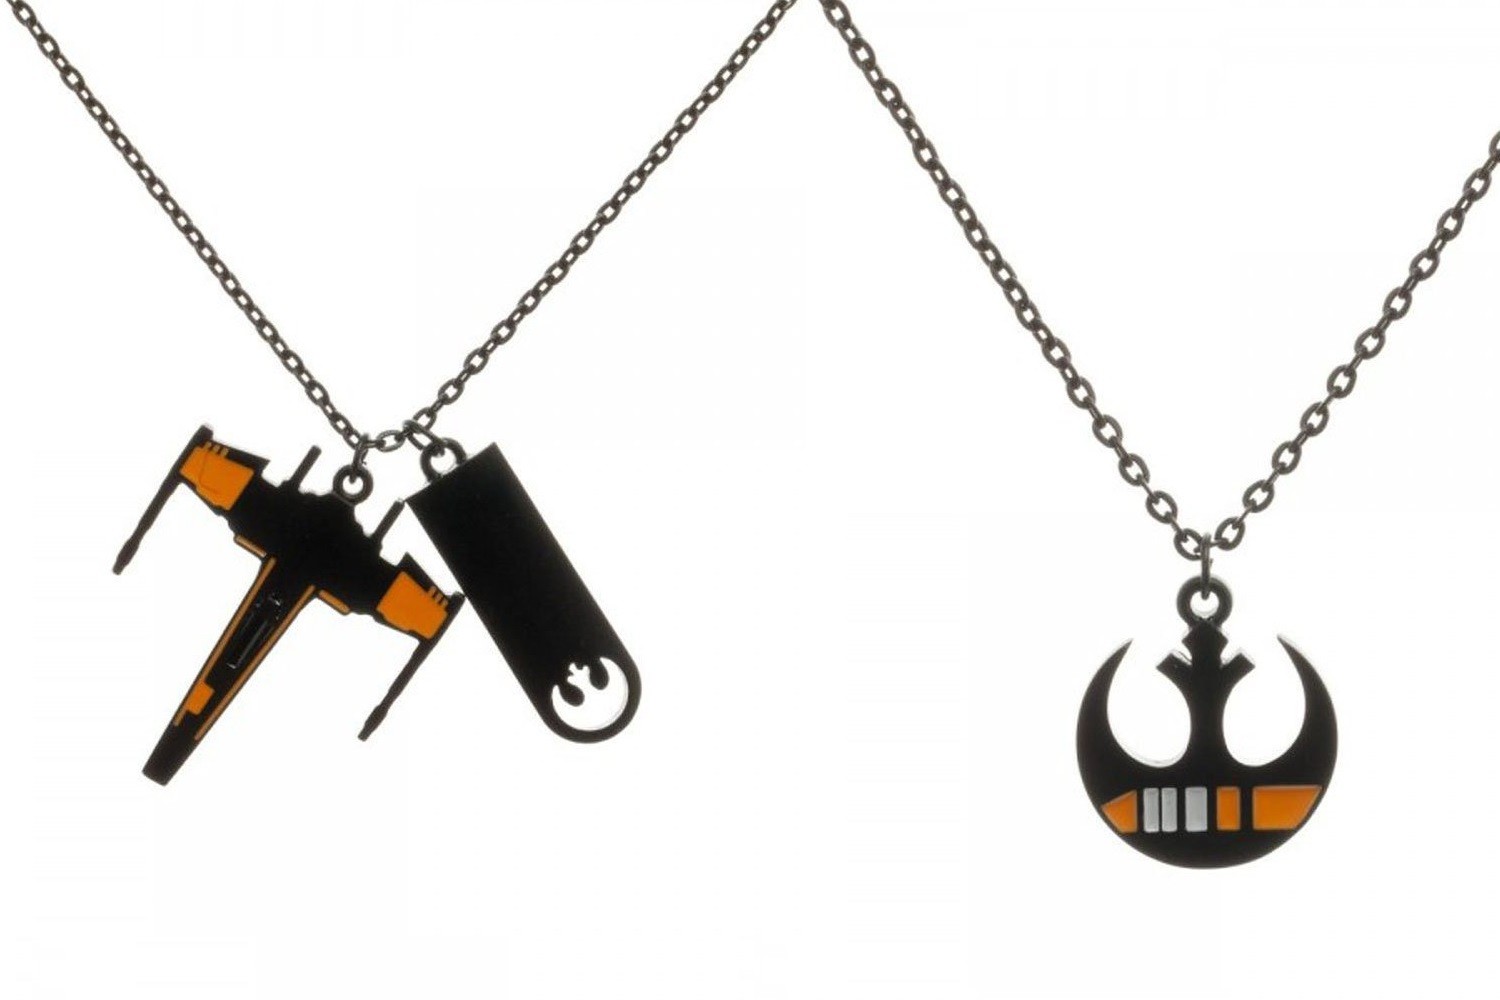 New Black Squadron themed necklaces